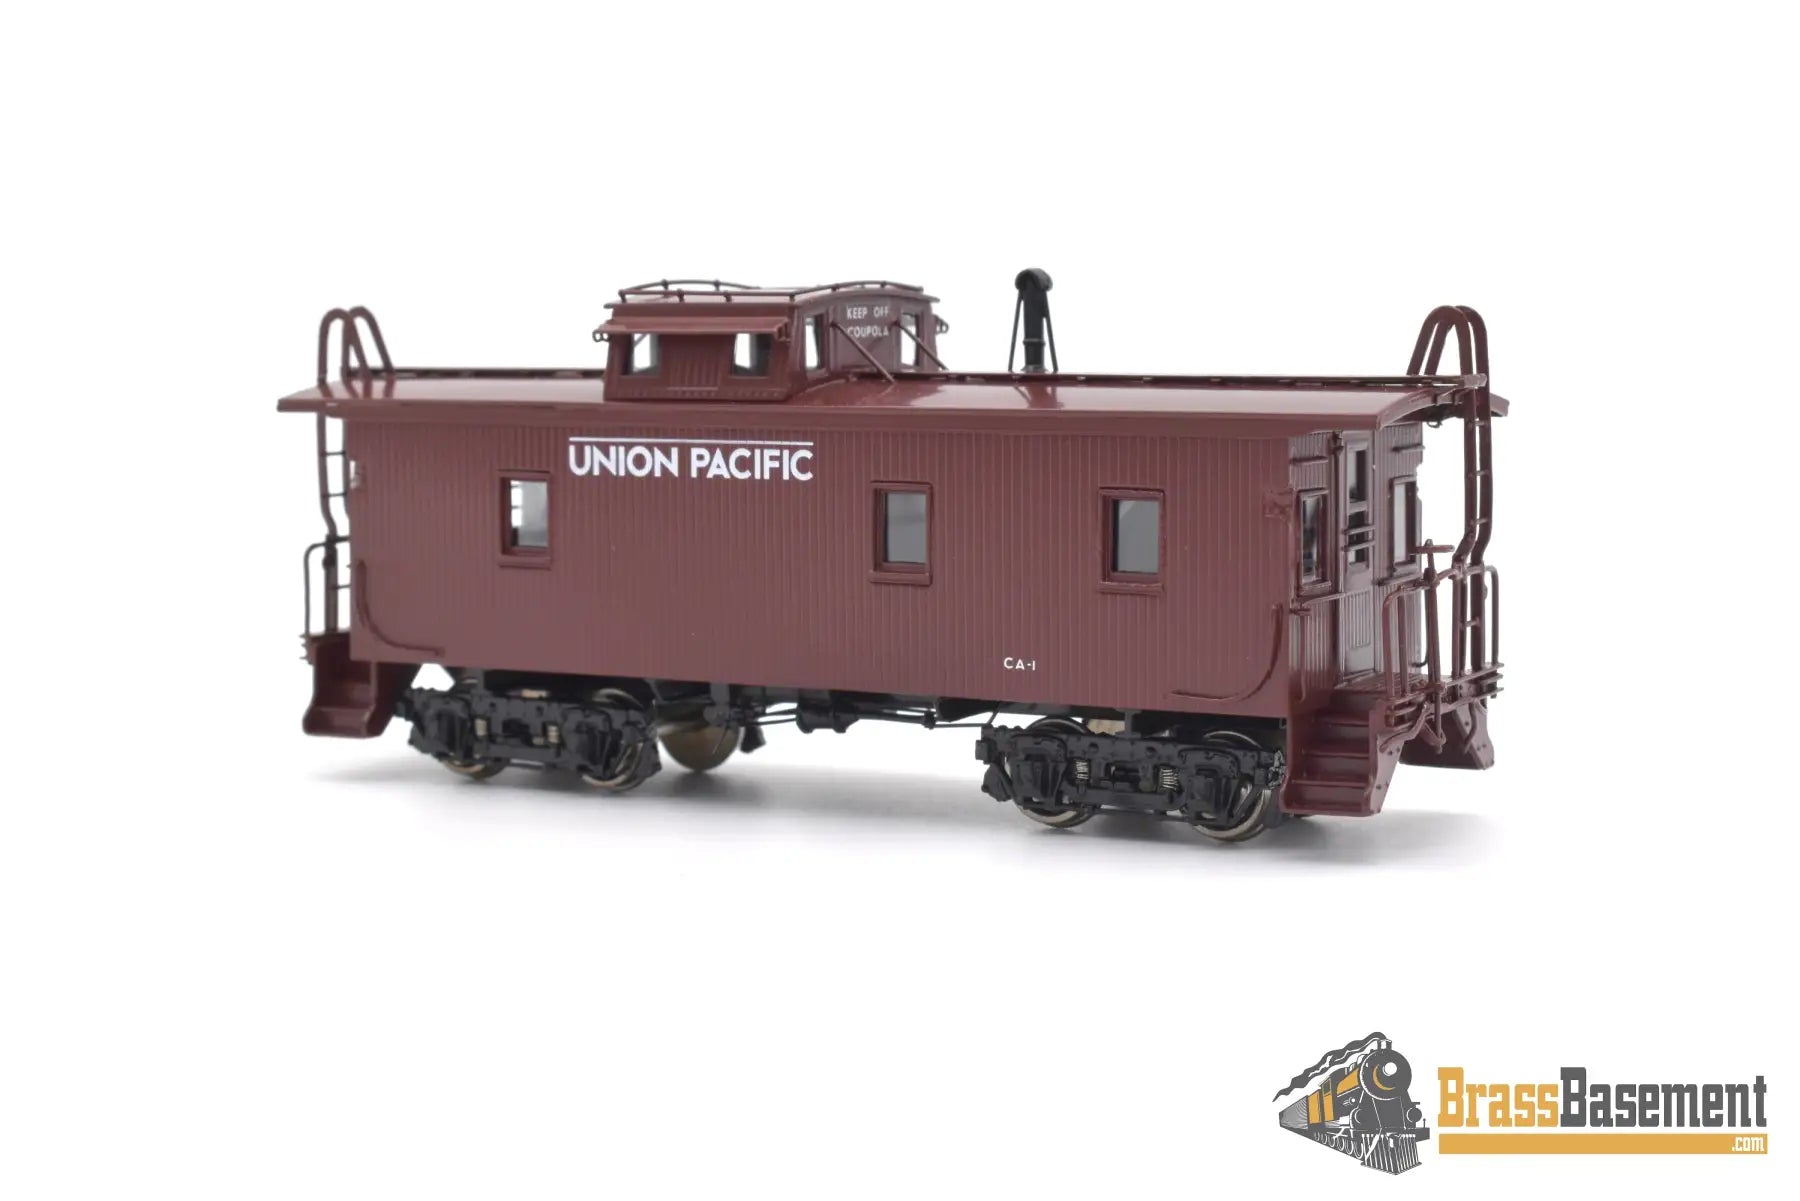 Ho Brass - Omi 3924.1 Union Pacific Up Ca - 1 Caboose Freight Car Red New